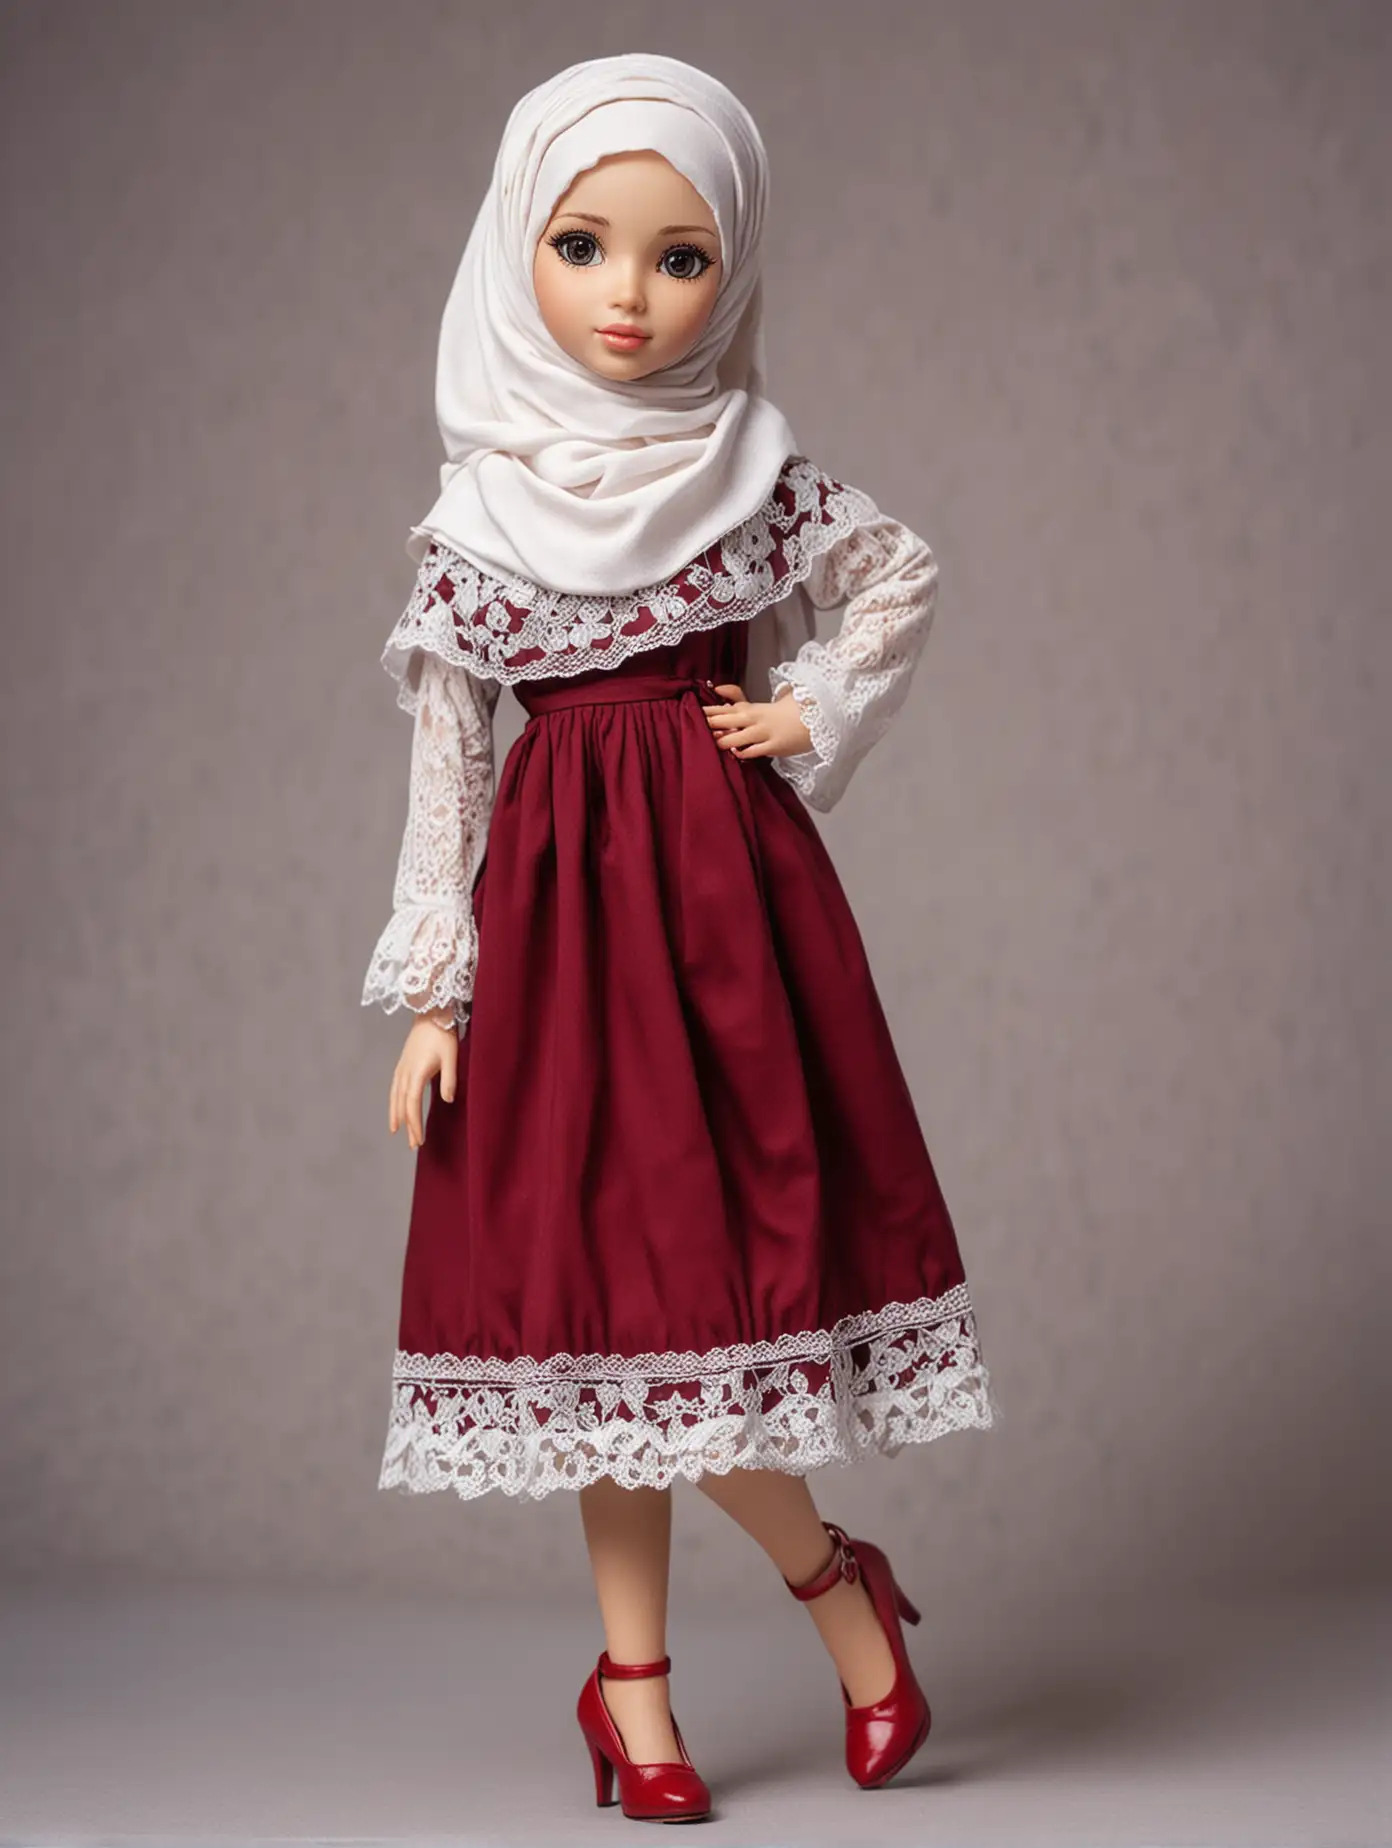 A beautiful teenage female doll, wearing a hijab, white skin, wearing a maroon dress, red shoes, on her hands